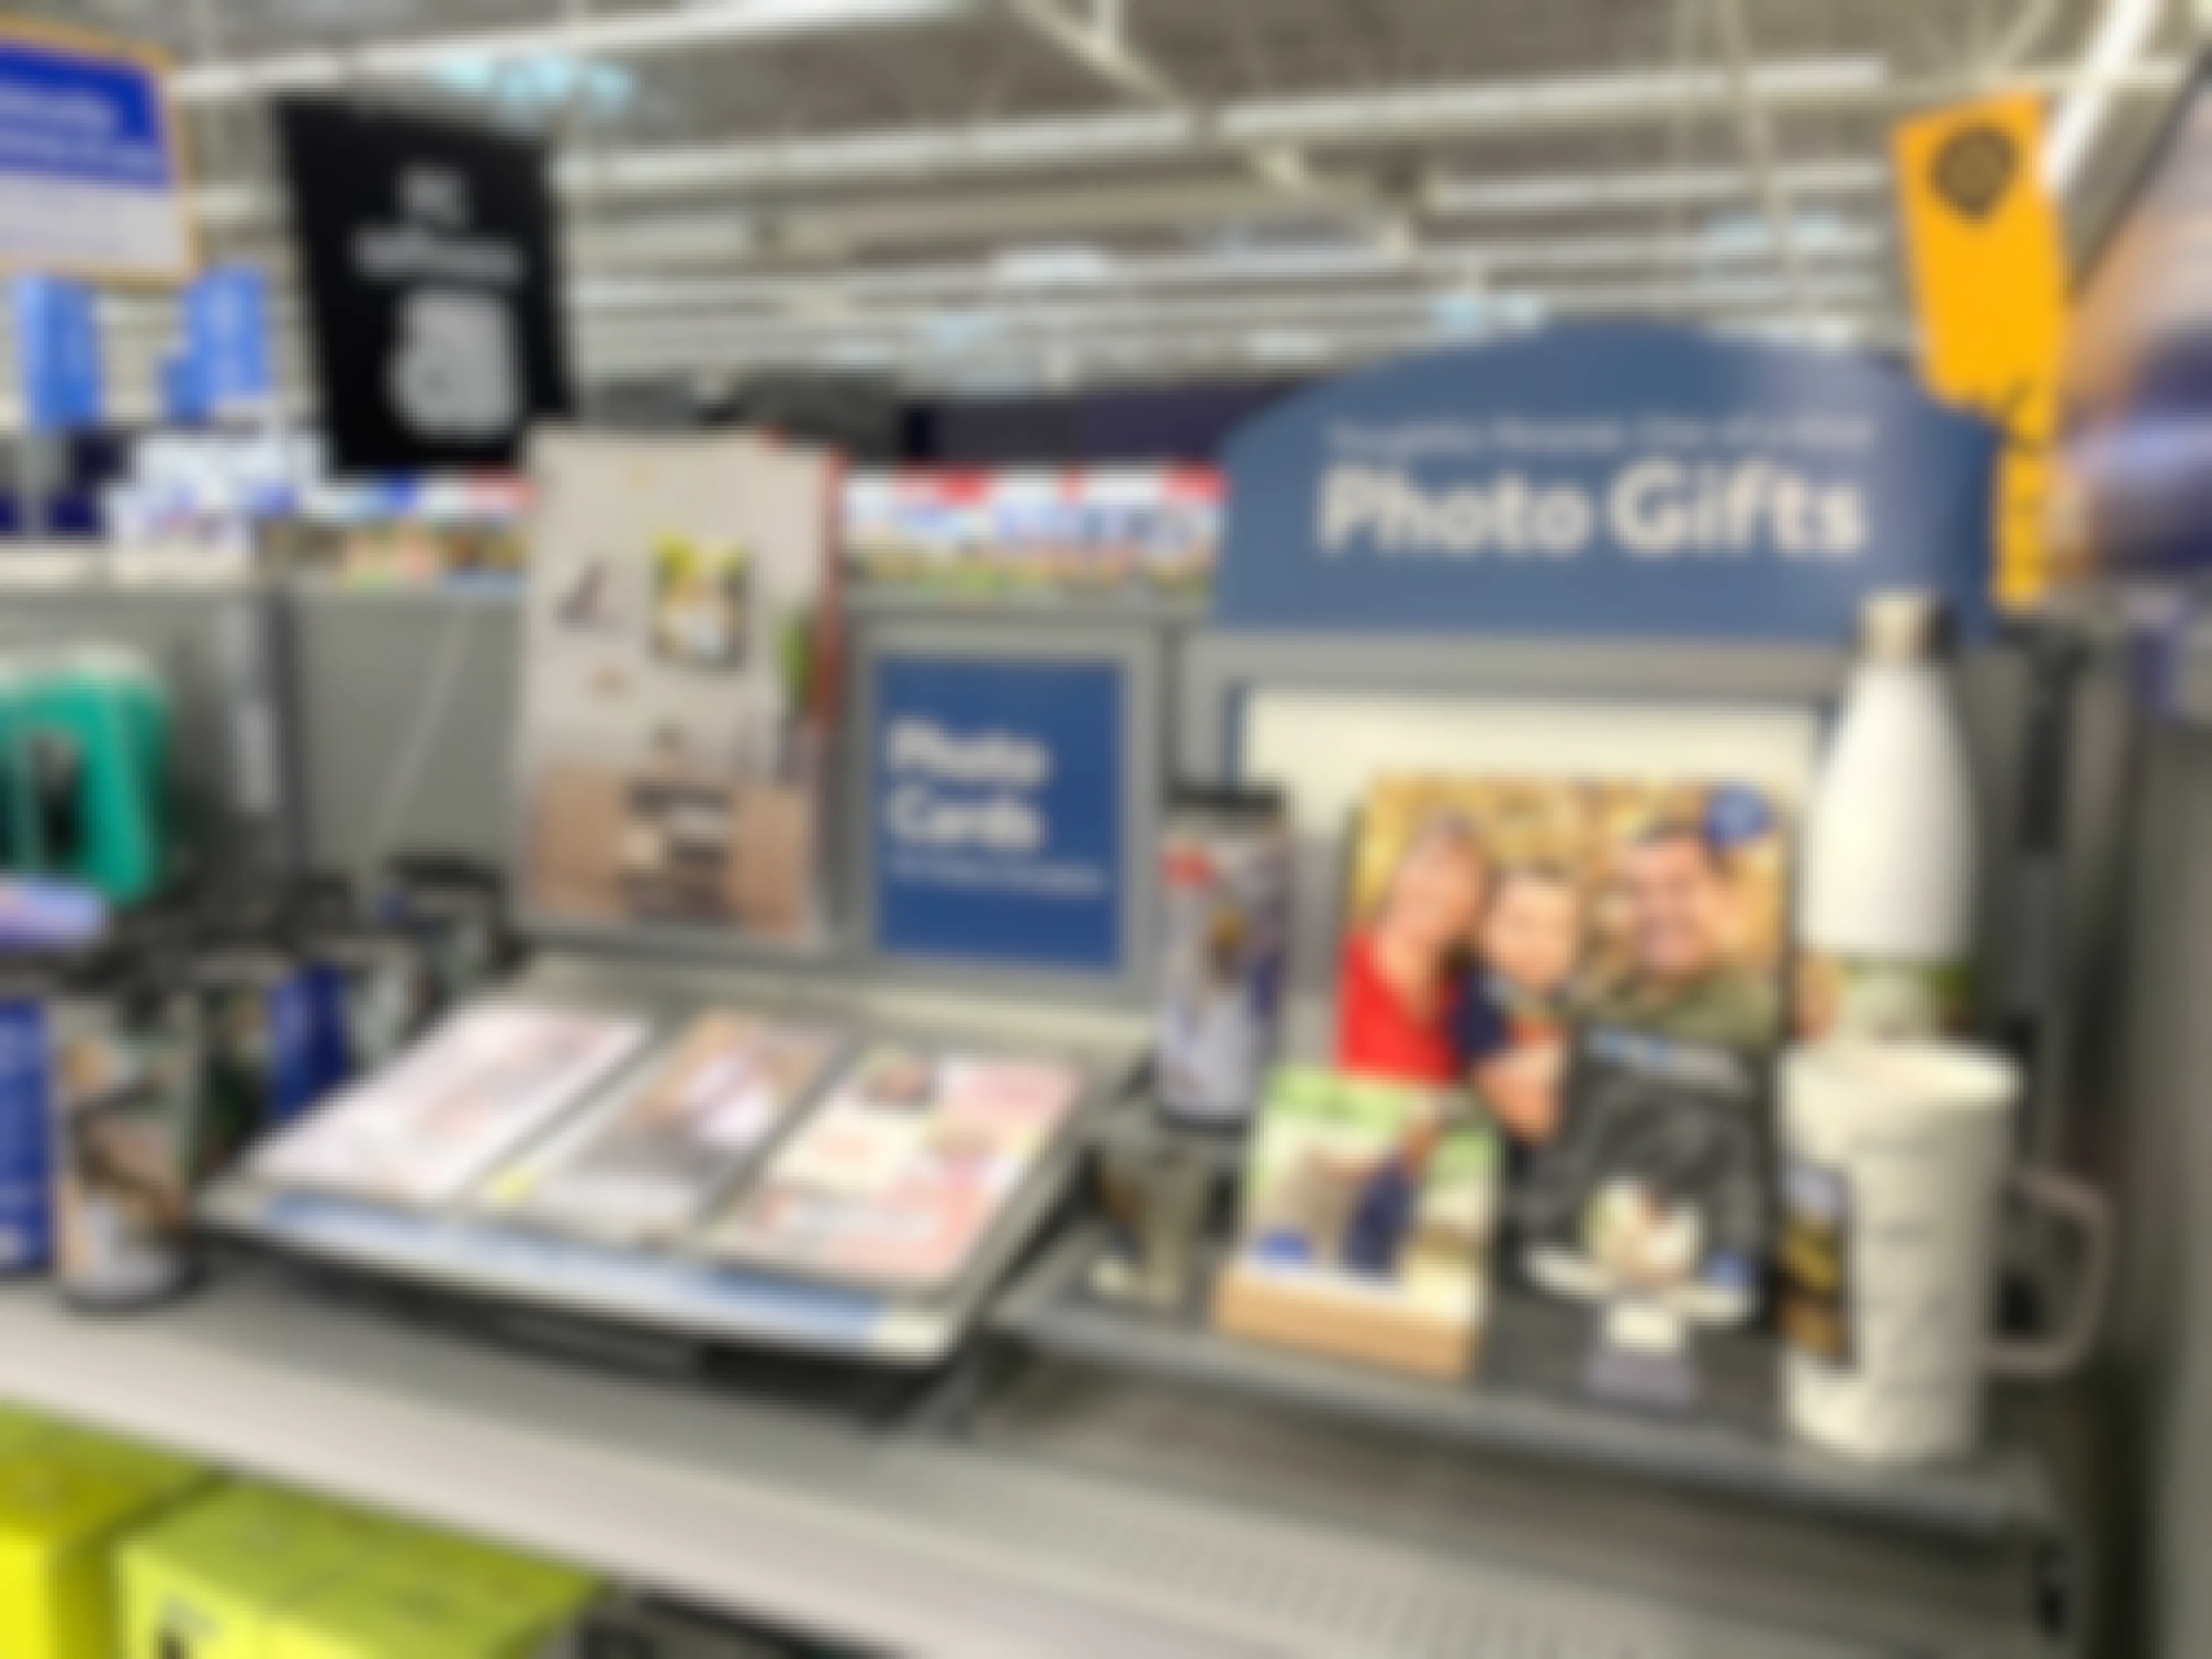 The display for Walmart's photo center